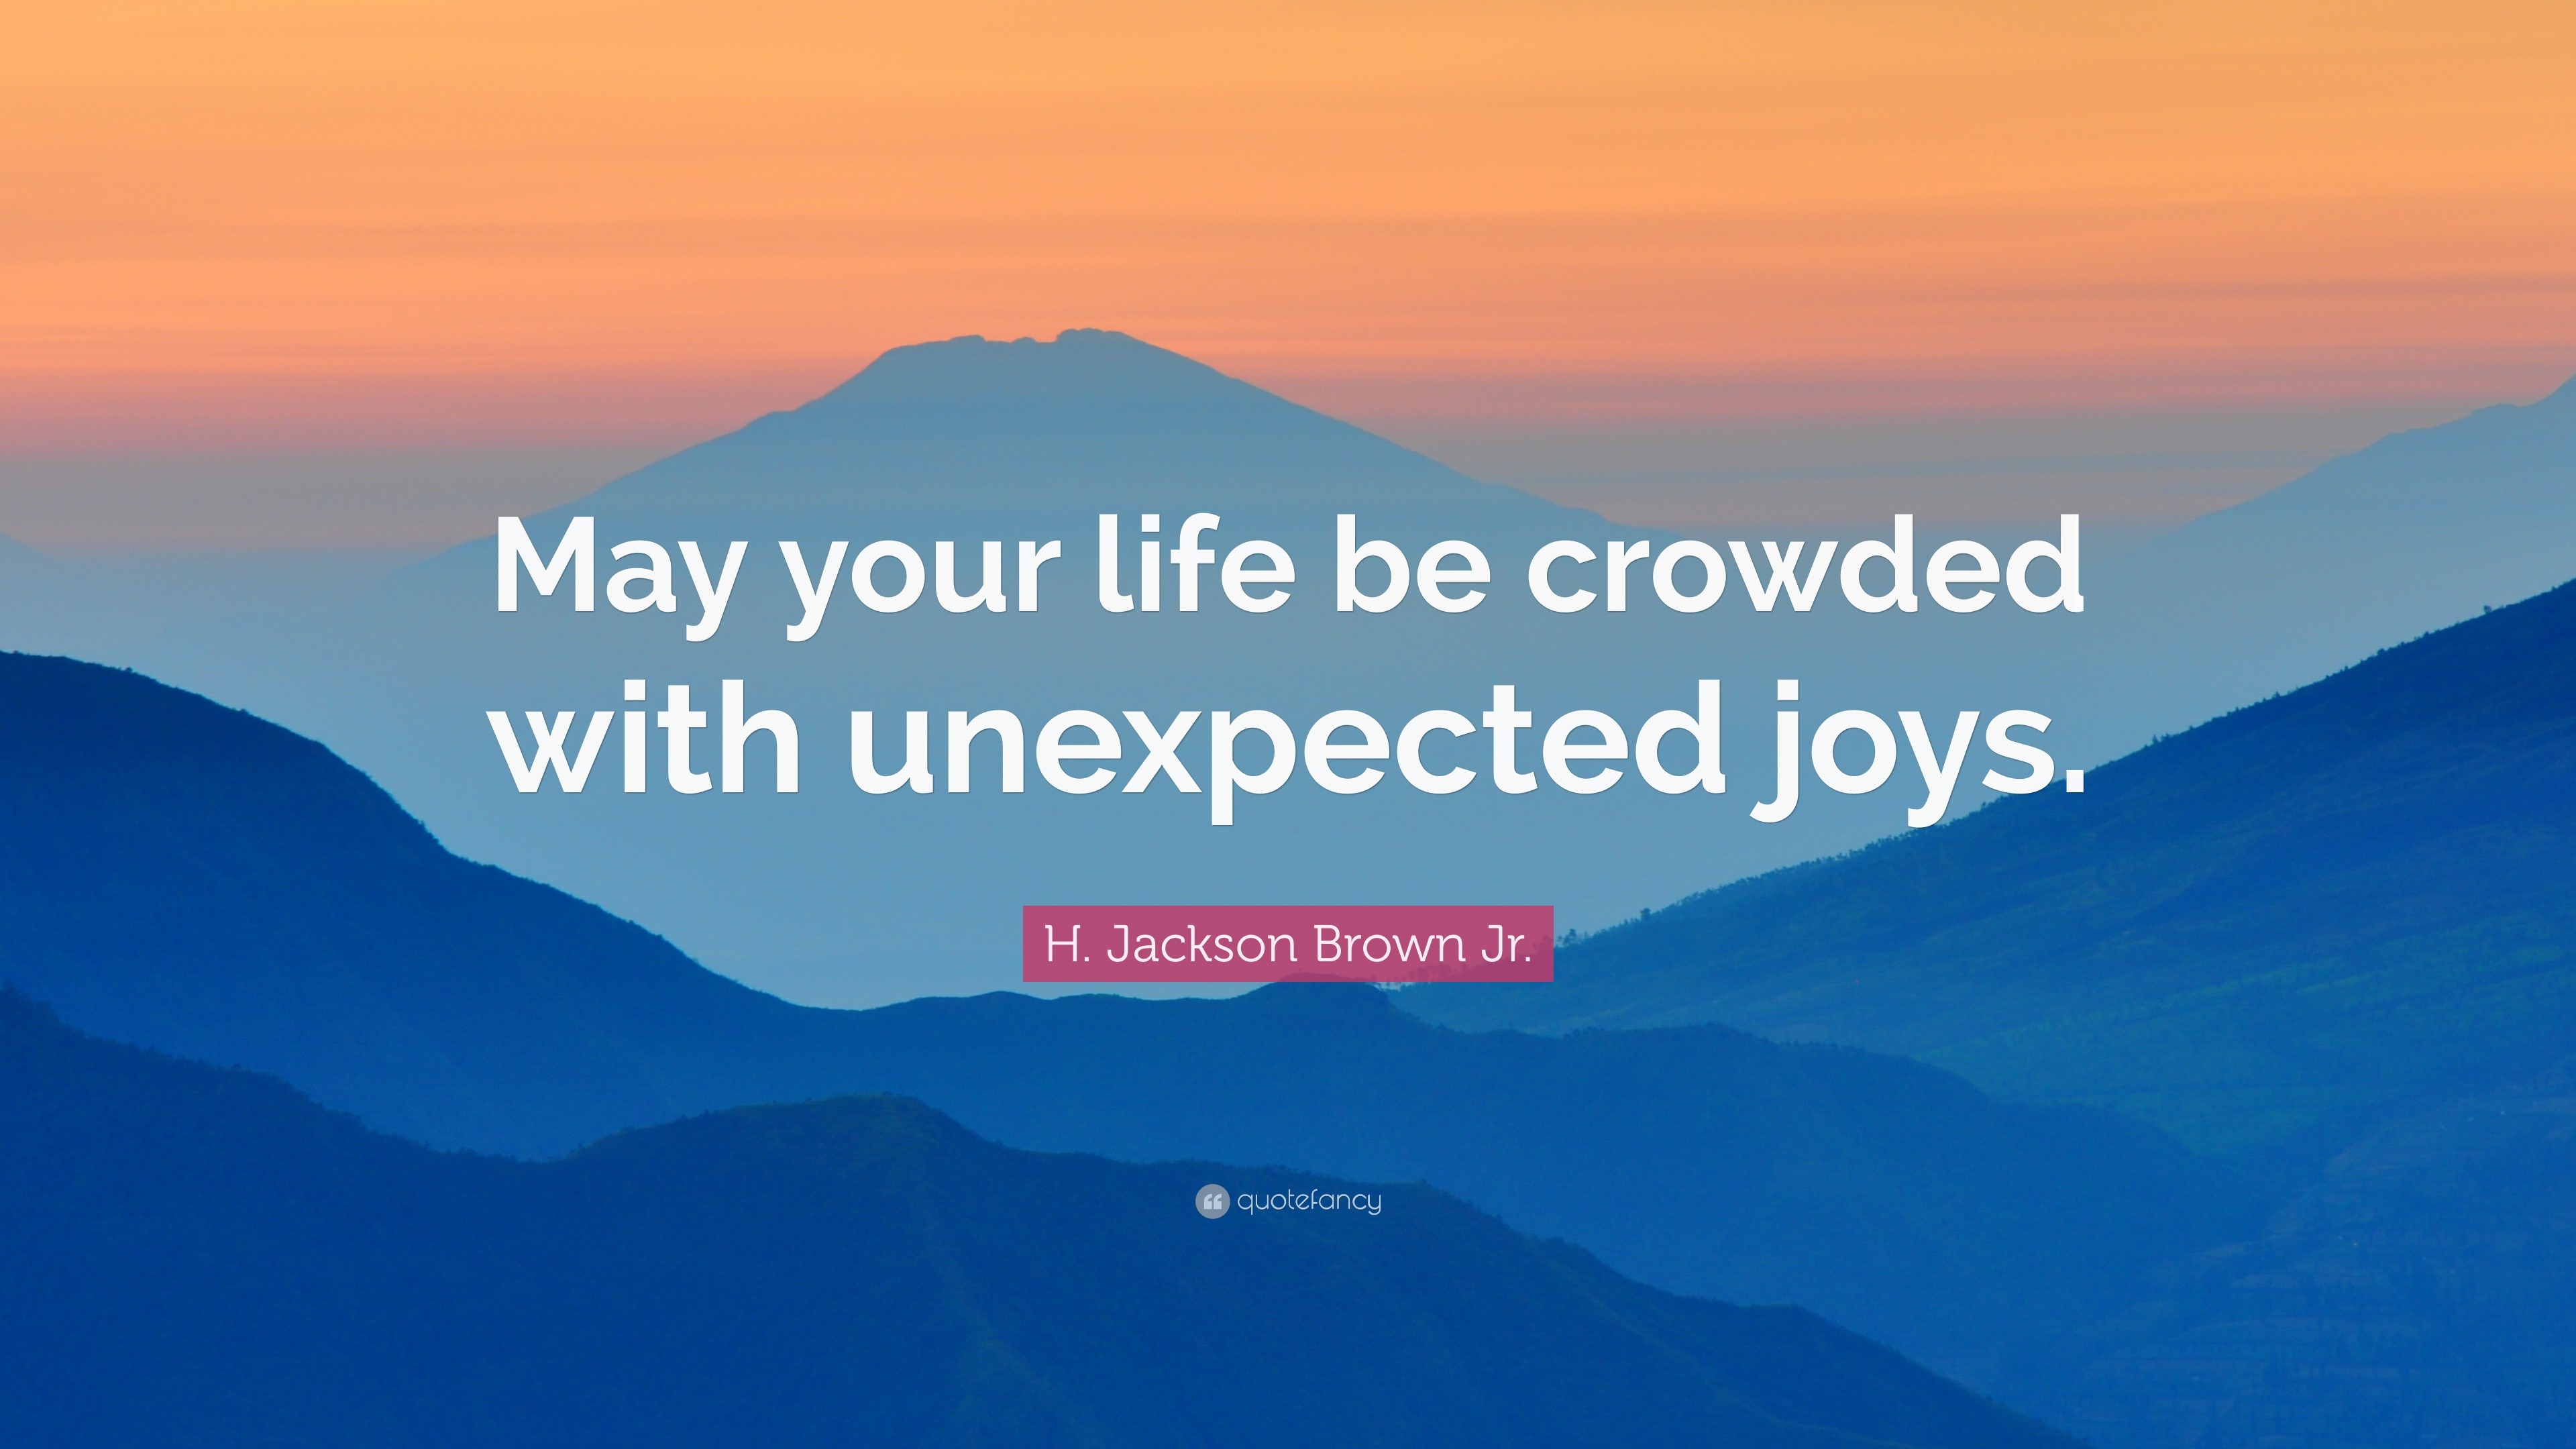 H. Jackson Brown Jr. Quote “May your life be crowded with unexpected